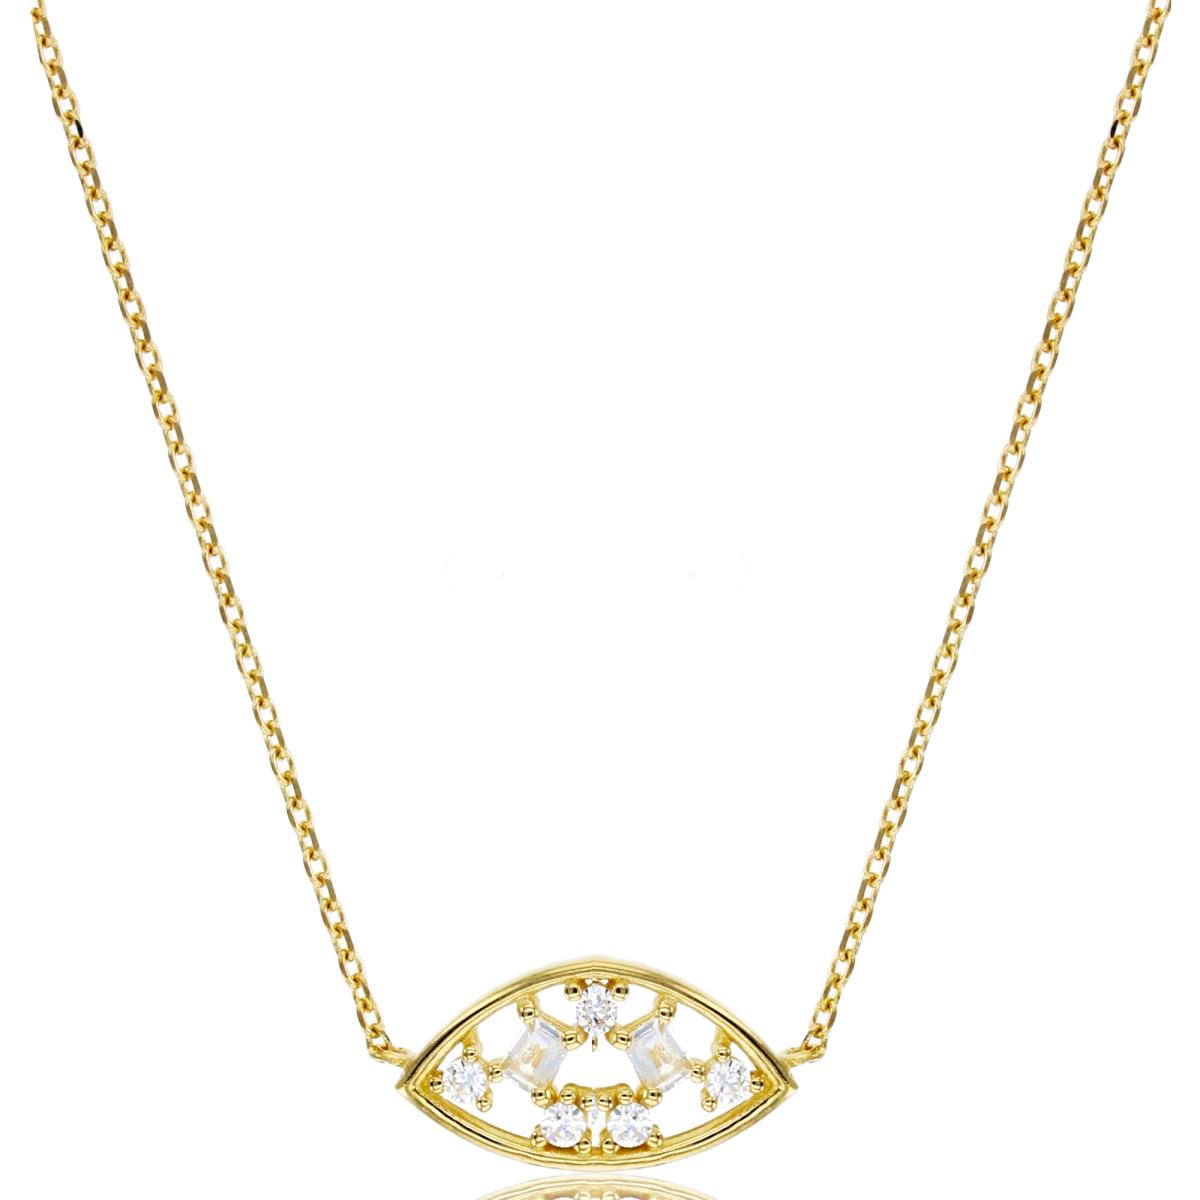 10K Yellow Gold Rnd & SB CZ Scattered MQ-shape 16"+2"Necklace